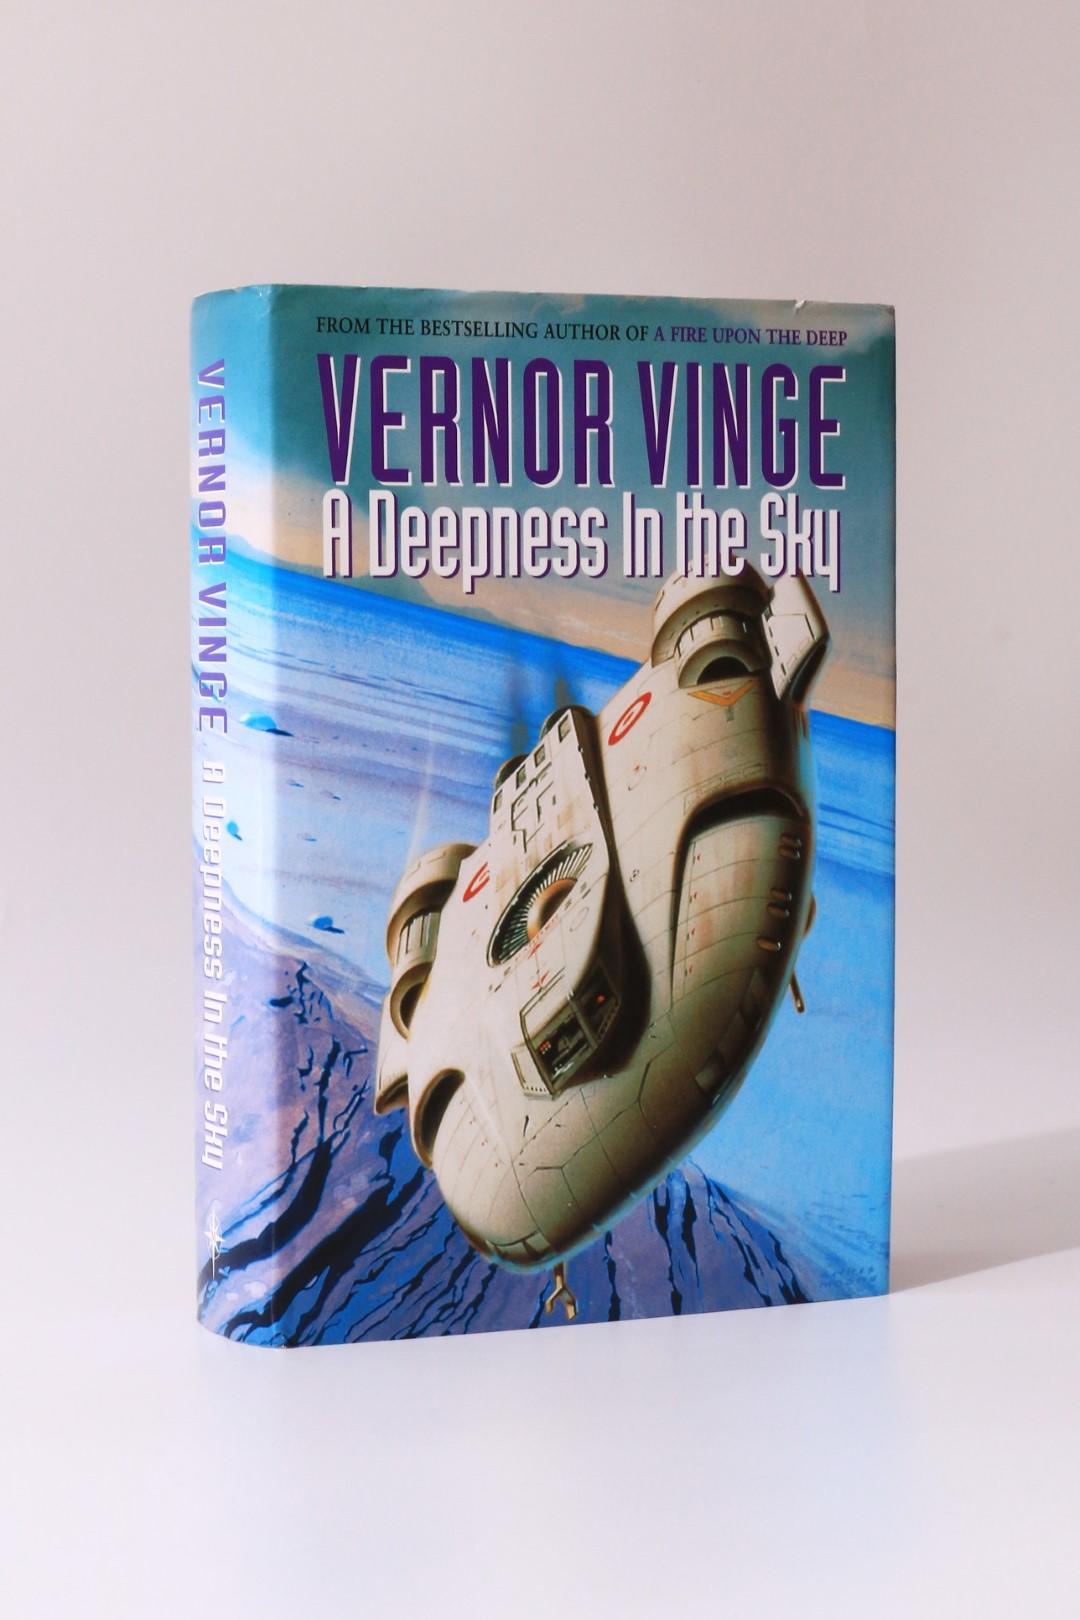 Vernor Vinge - A Deepness in the Sky - Millennium, 1999, First Edition.